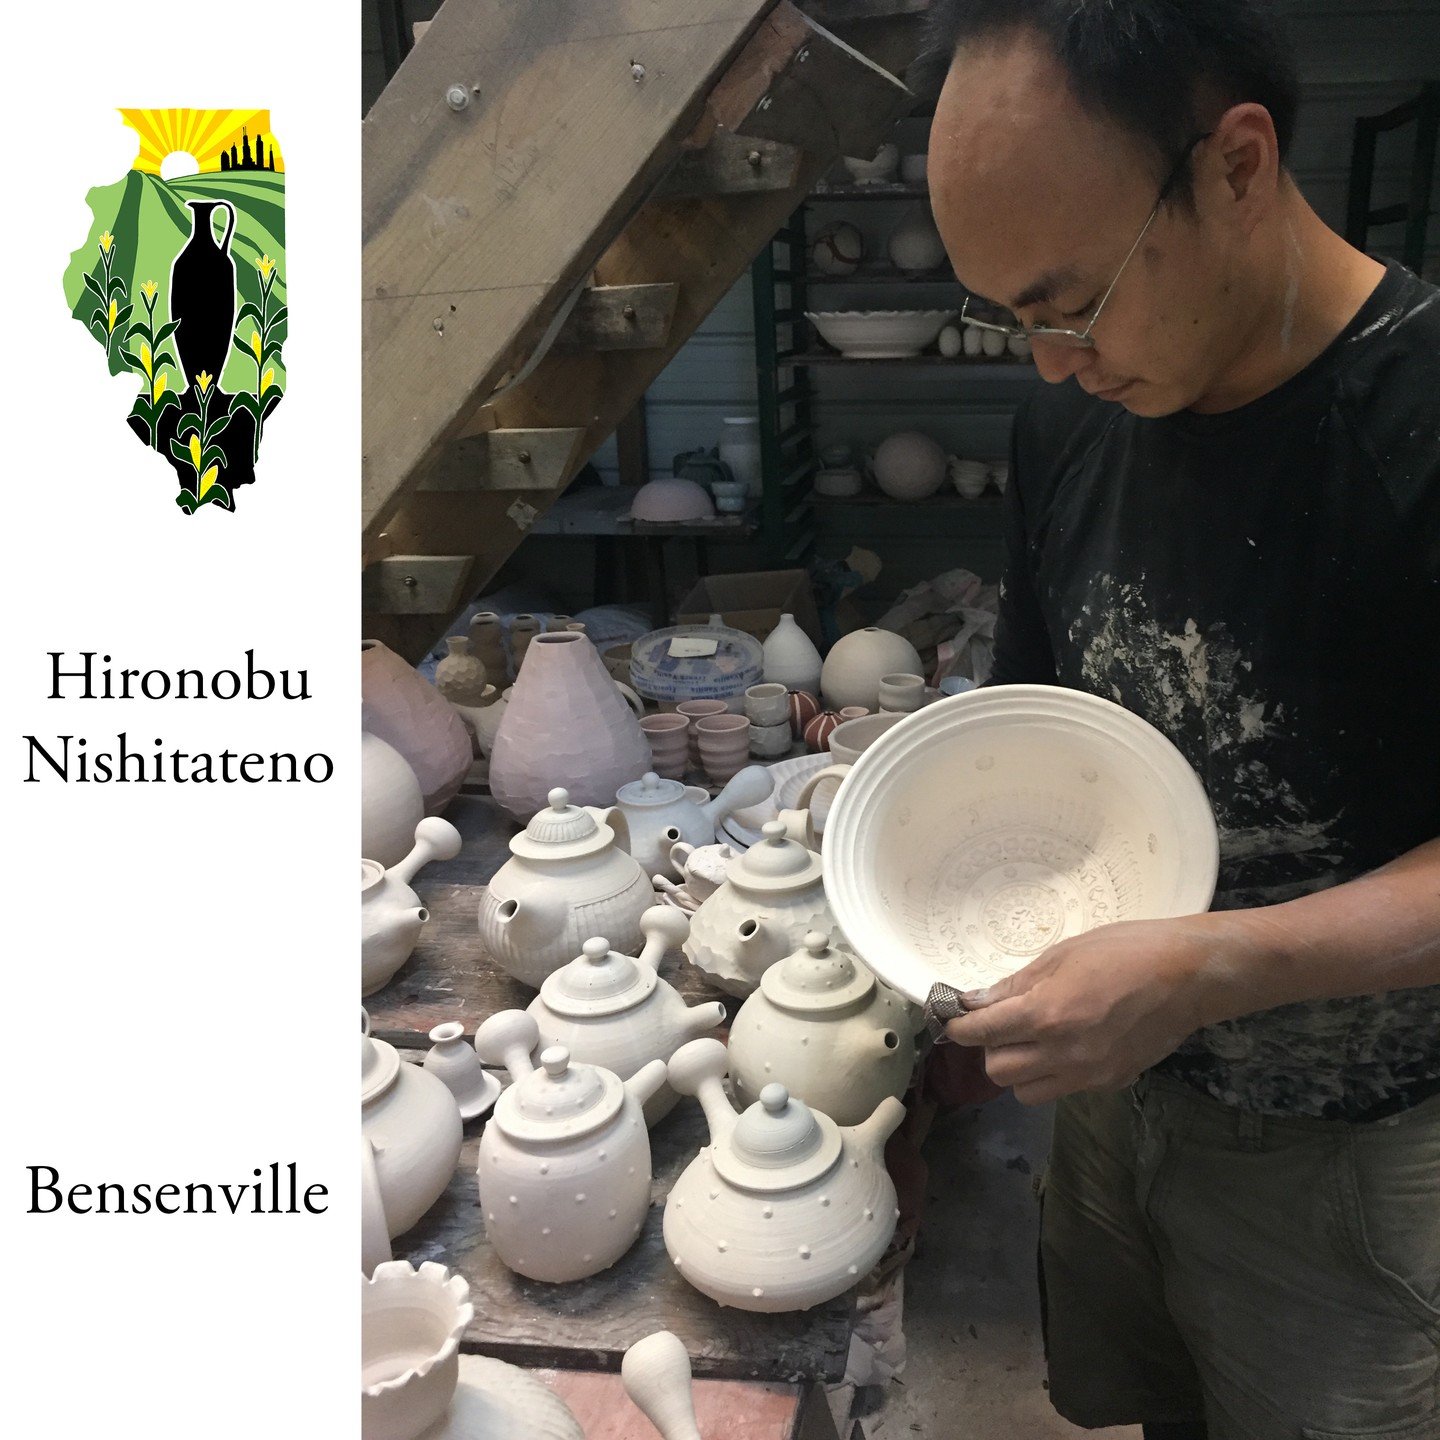 The third guest at the Bensenville stop on the Northern Illinois Pottery tour is Hironobu &quot;Nishi&quot; Nishitateno. This will be Nishi&rsquo;s 4th year participating in the Northern Illinois Pottery Tour!

&ldquo;My passion for making pottery sp